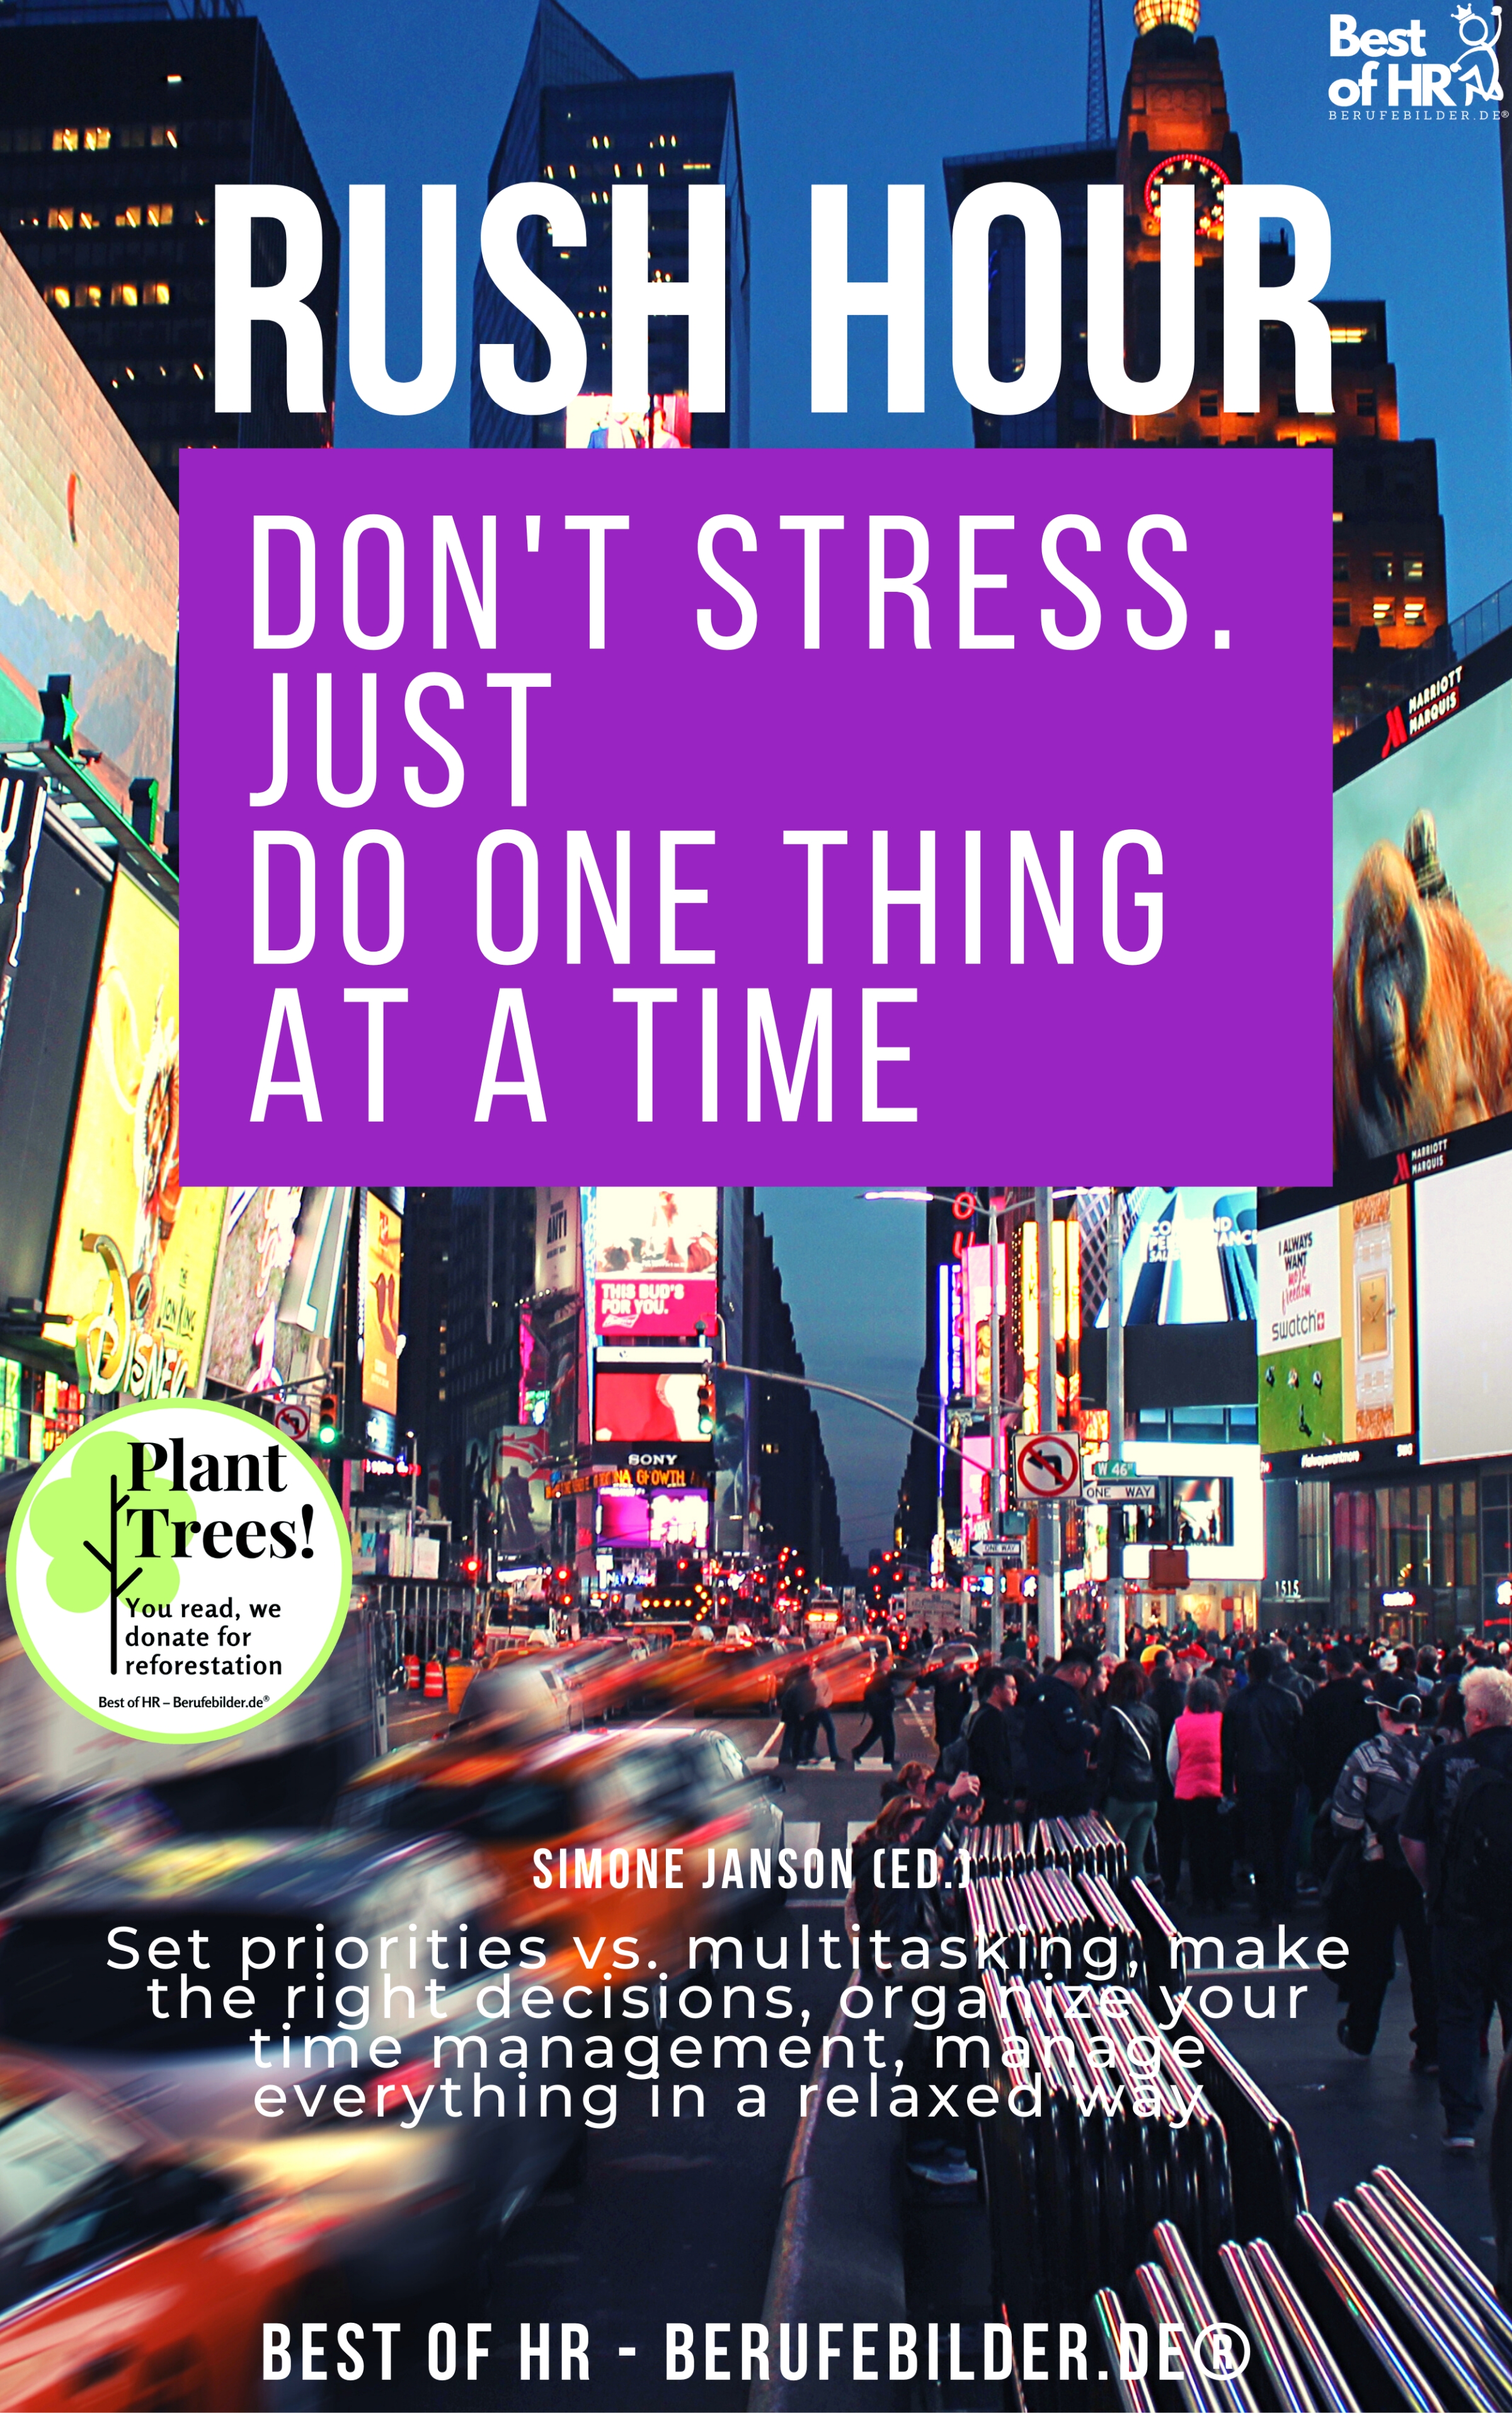 Rush Hour. Don"t Stress. just Do One Thing at a Time